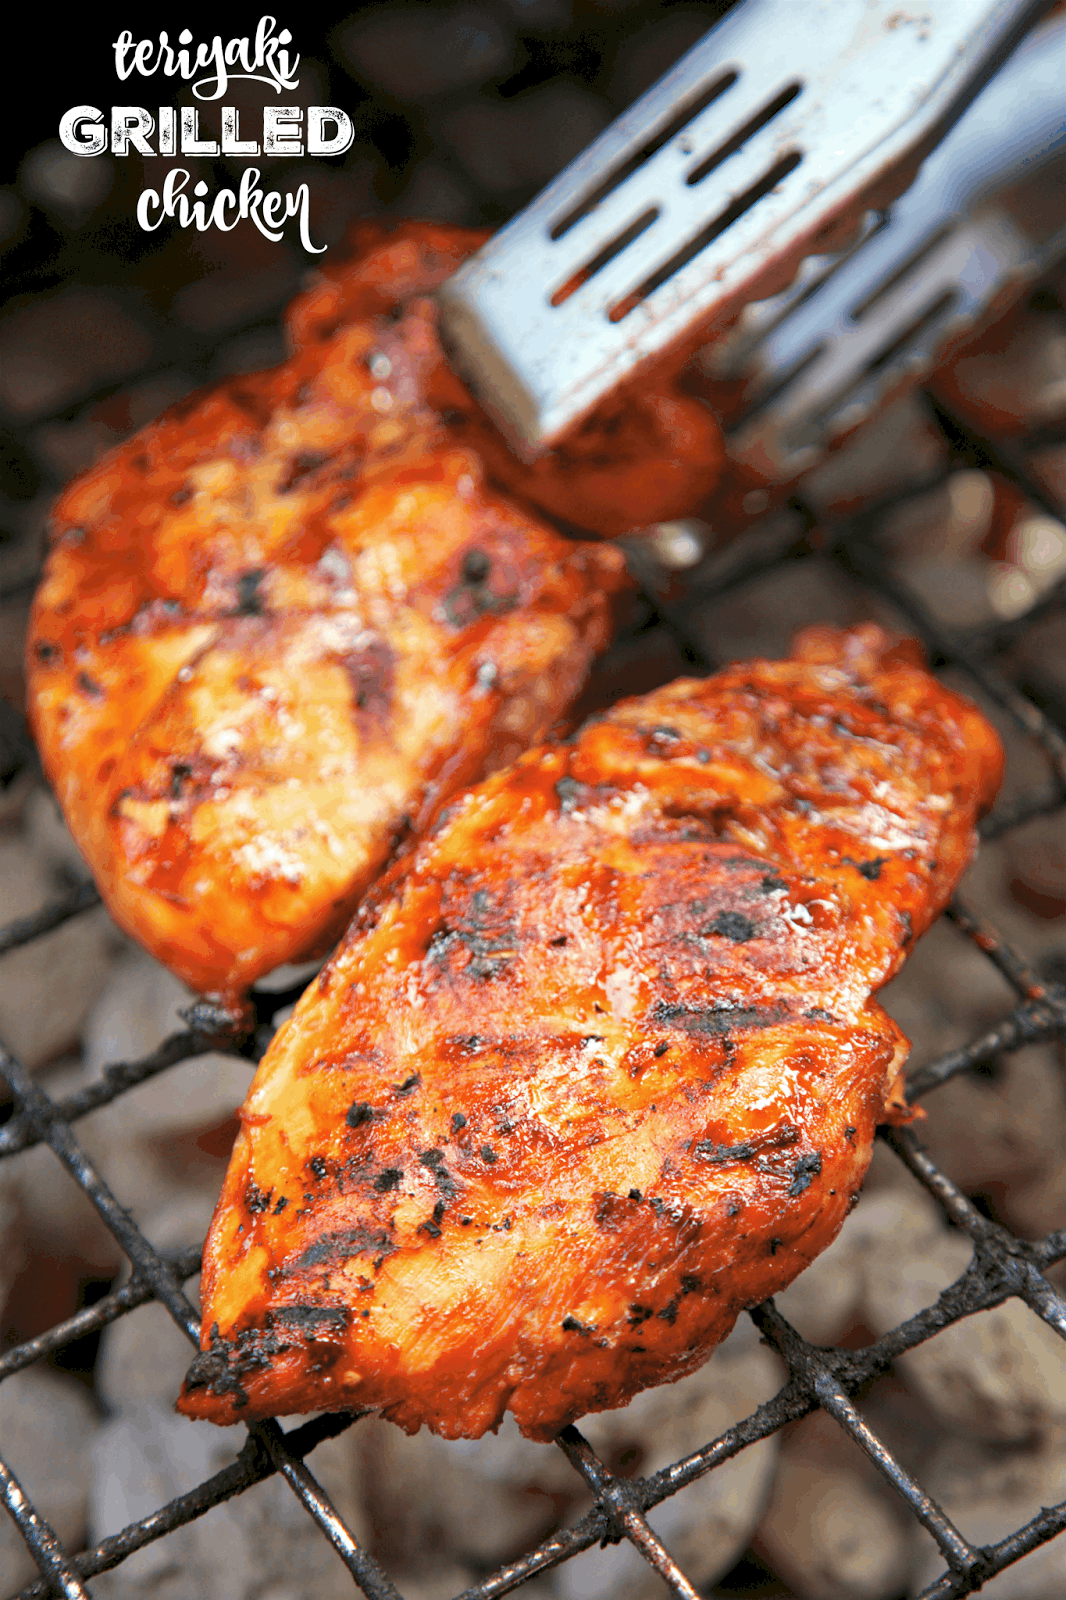 Teriyaki Grilled Chicken - no more bottled teriyaki sauce! This marinade is so easy and super delicious! Soy sauce, water, sugar, worcestershire, vinegar, oil, onion and garlic. Can use on pork or steak too. Everyone loved this - even our picky eaters! I keep a jar of the marinade in the fridge for a quick and easy kid friendly weeknight meal! 